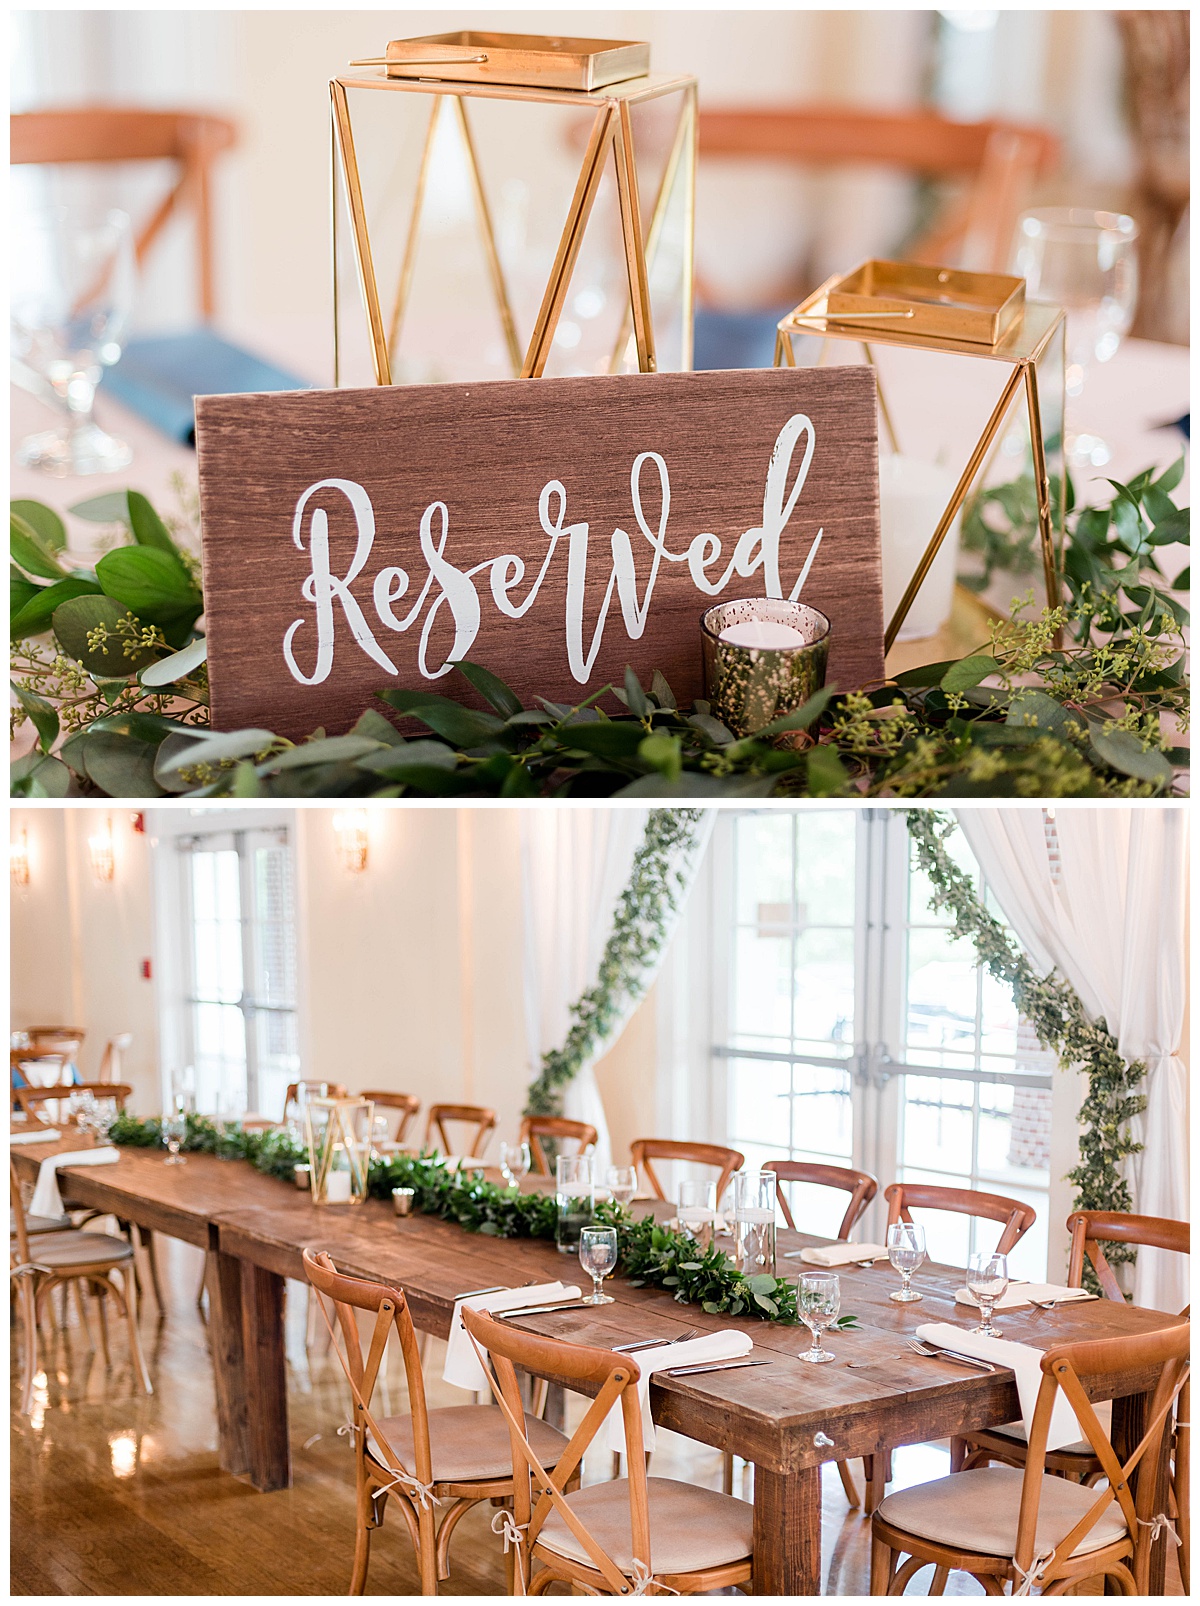 Woman's Club at Portsmouth Summer Wedding: wedding reception, reserved sign, table setting, garland, greenery